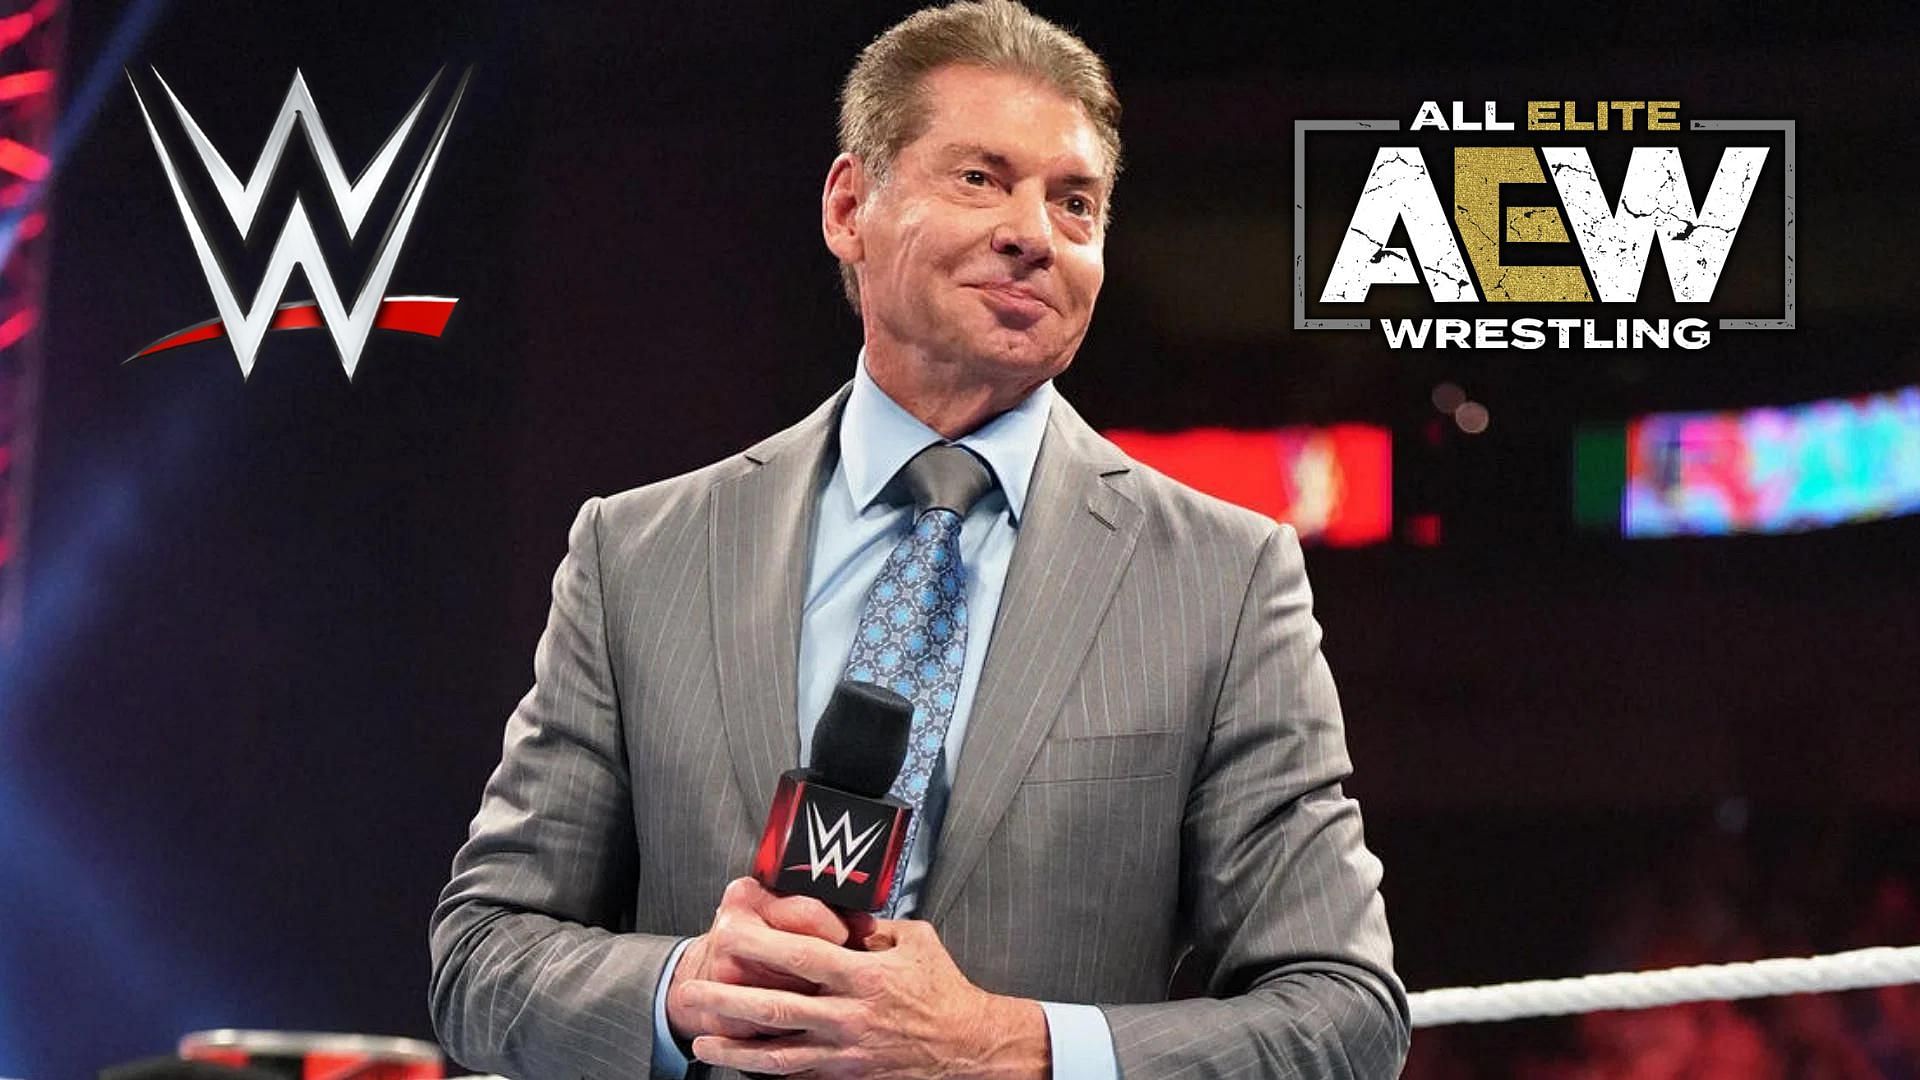 Vince McMahon could apparently be quite cruel to his employees